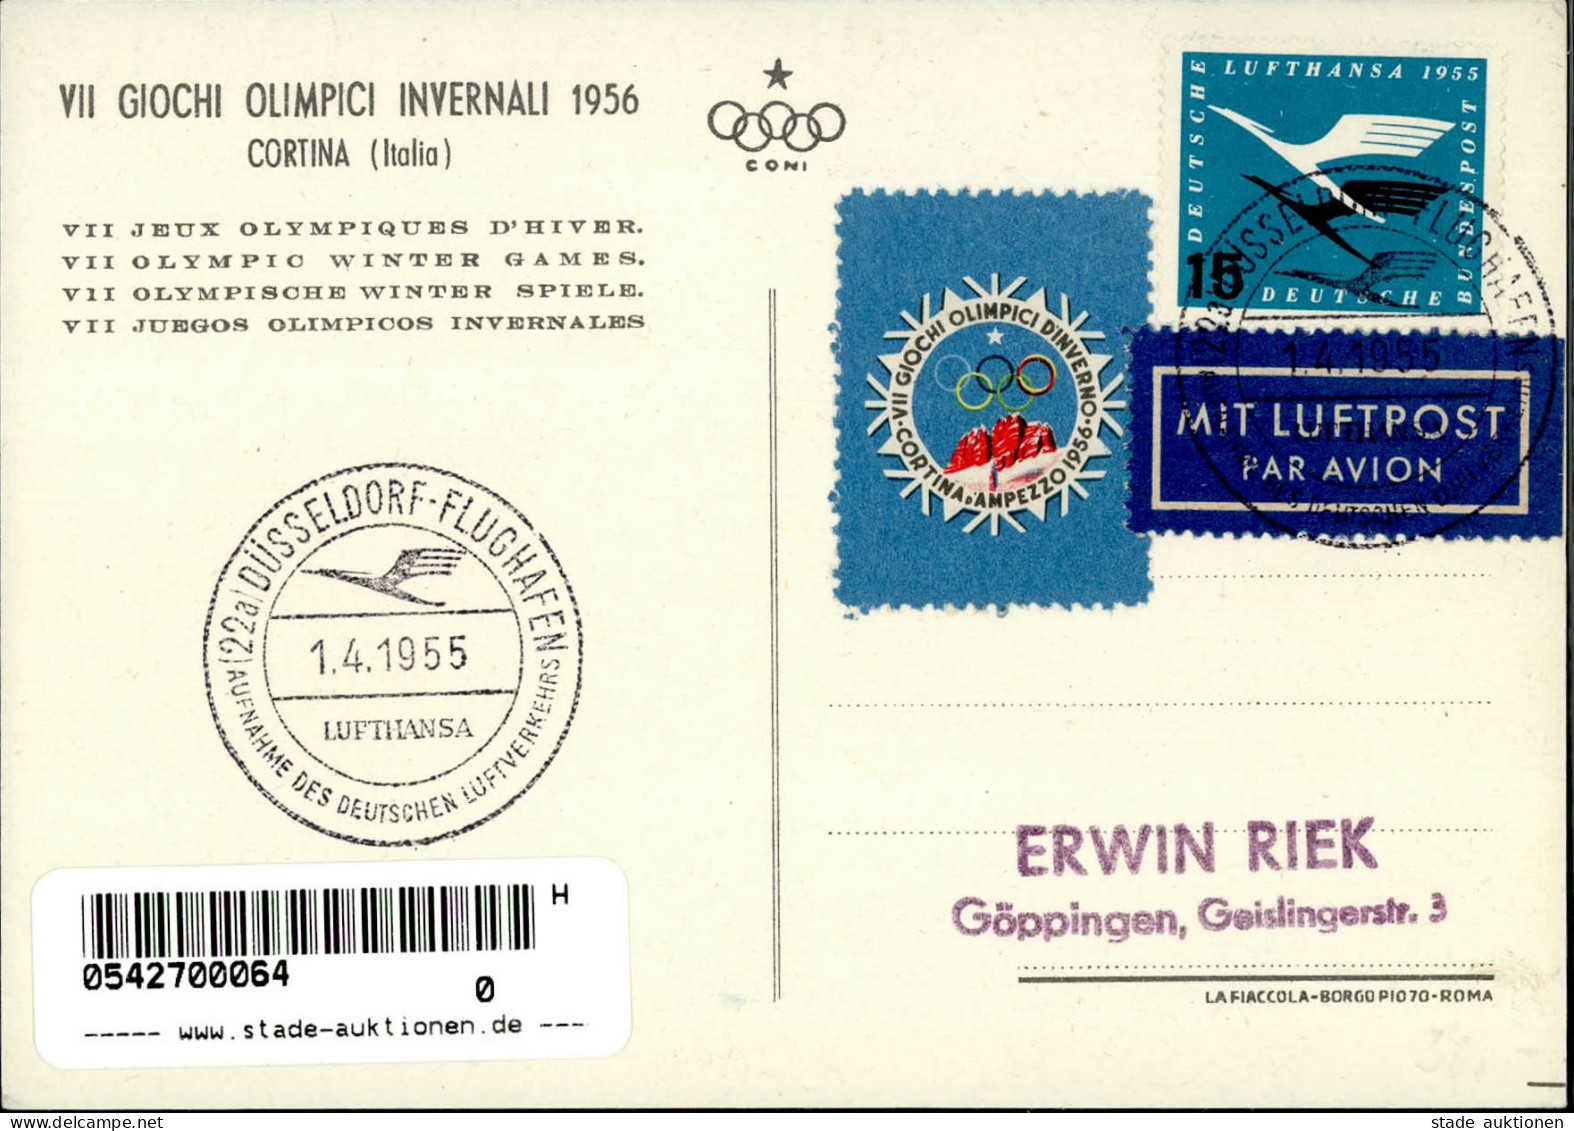 Olympiade Winterspiele Cortina 1956 Mit Luftpost 1955 I-II - Jeux Olympiques